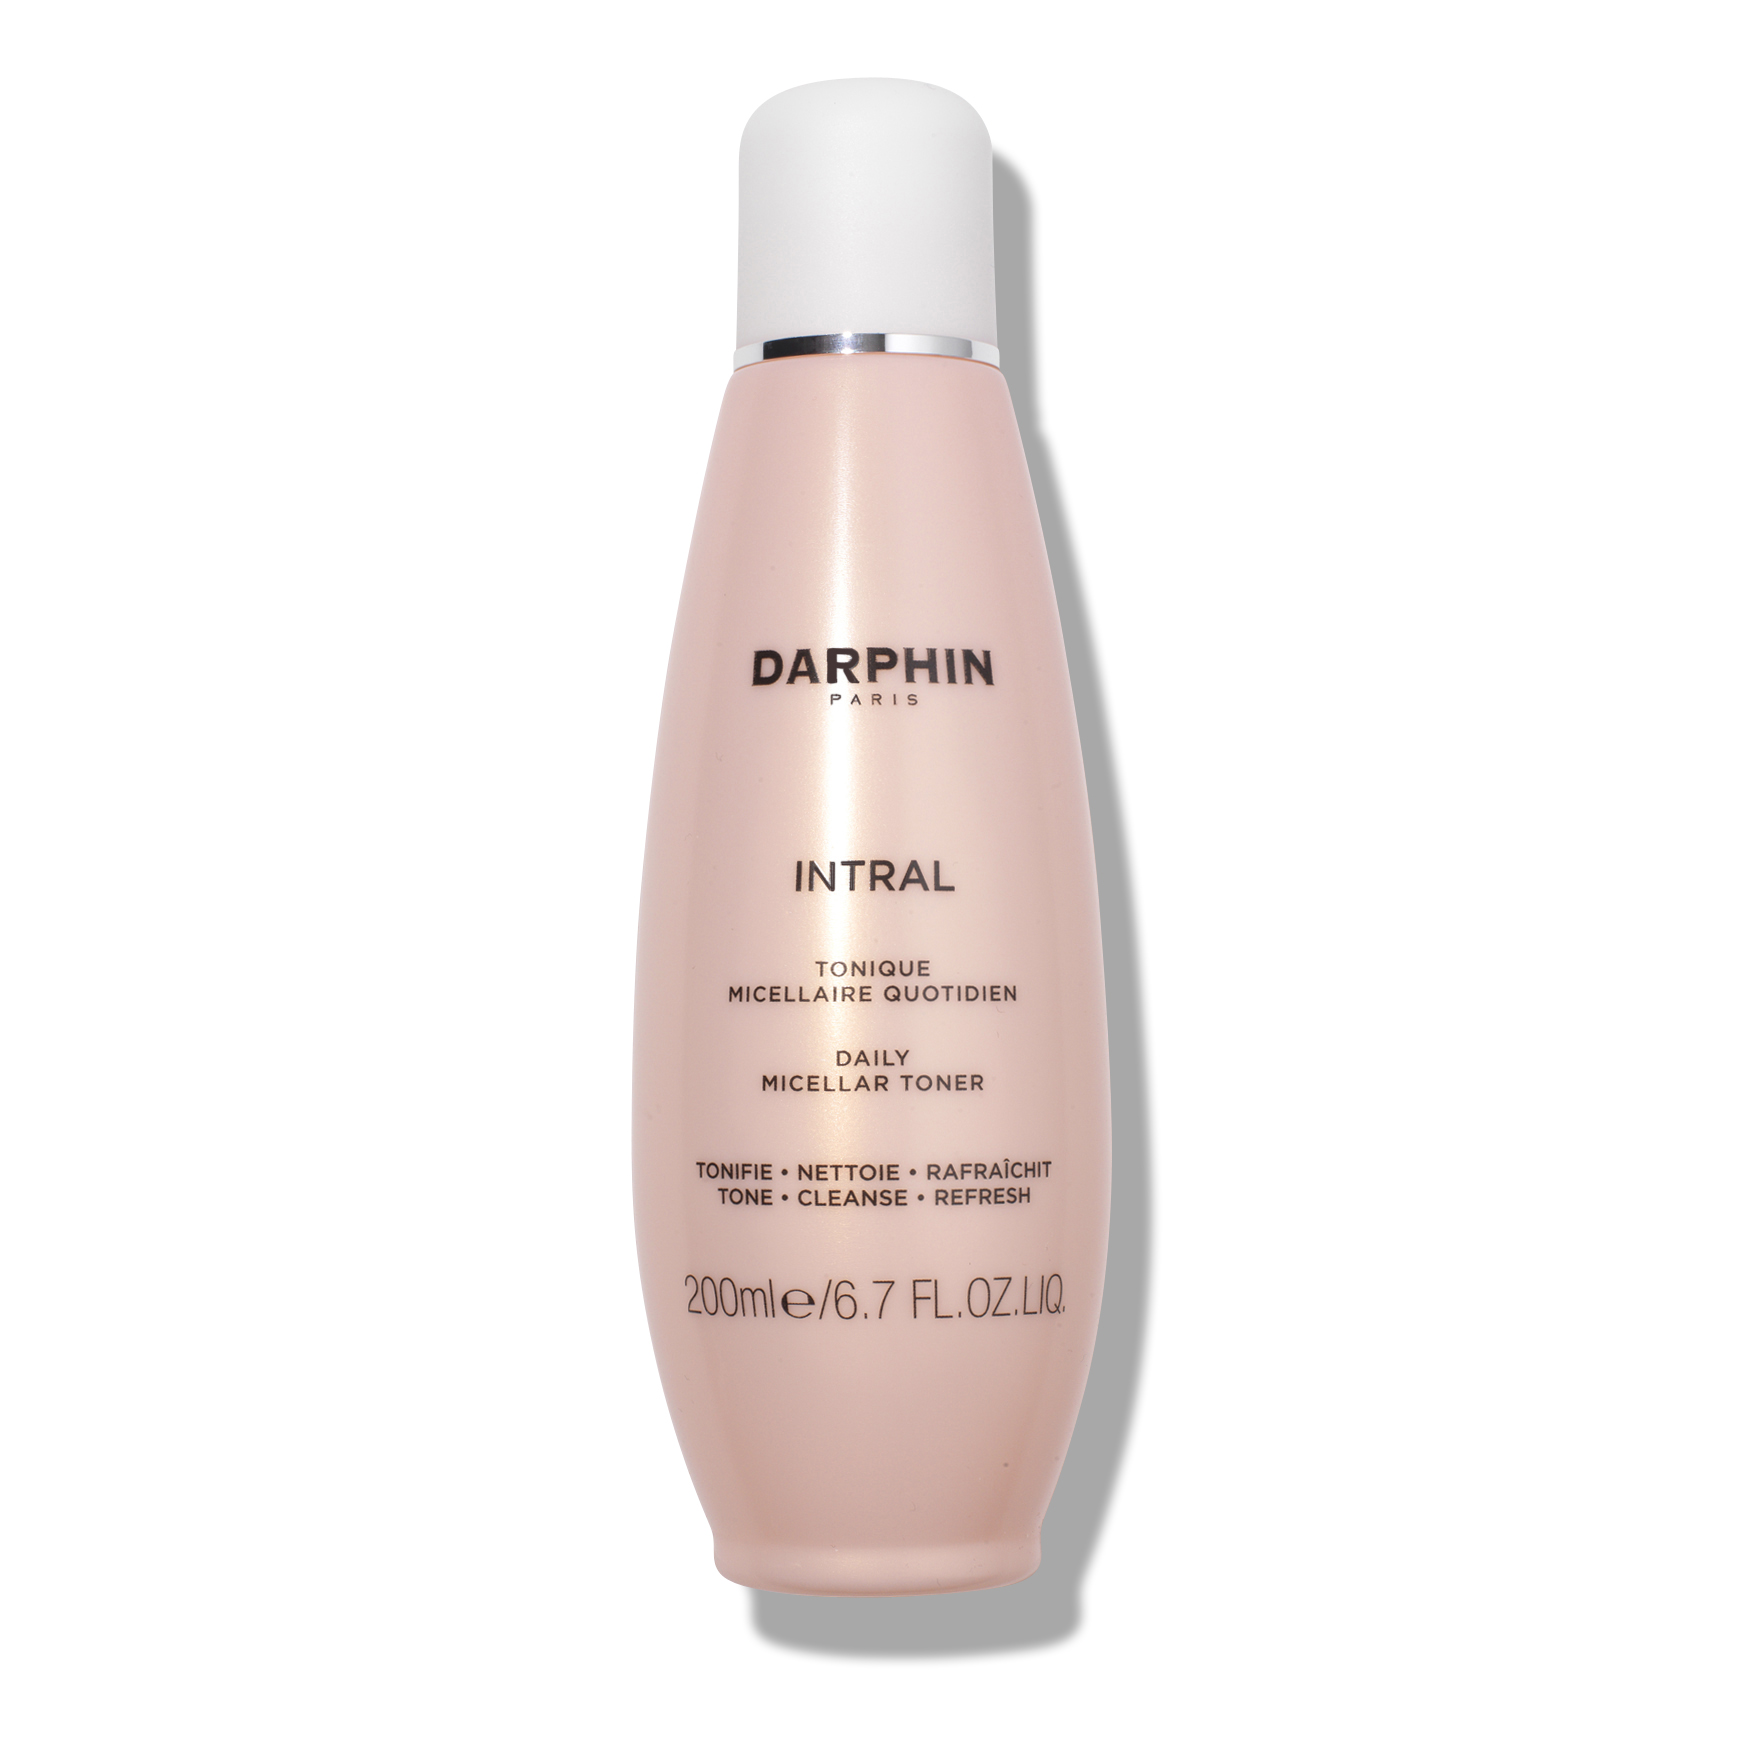 Darphin Lotion micellaire quotidienne Intral | Space NK